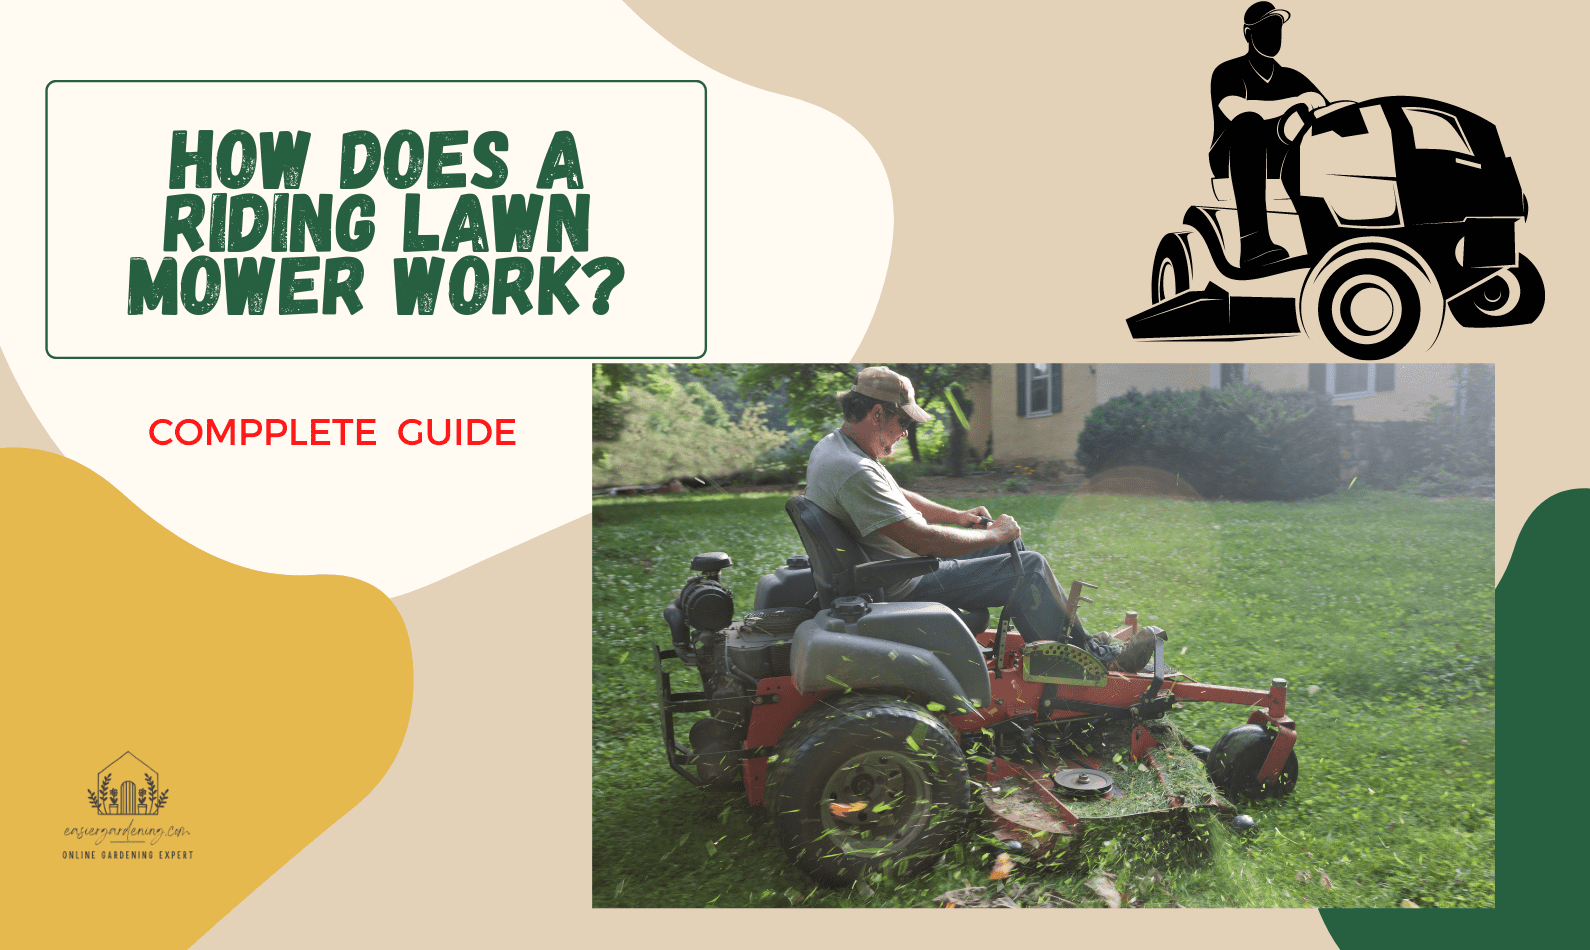 How Does A Riding Lawn Mower Work?